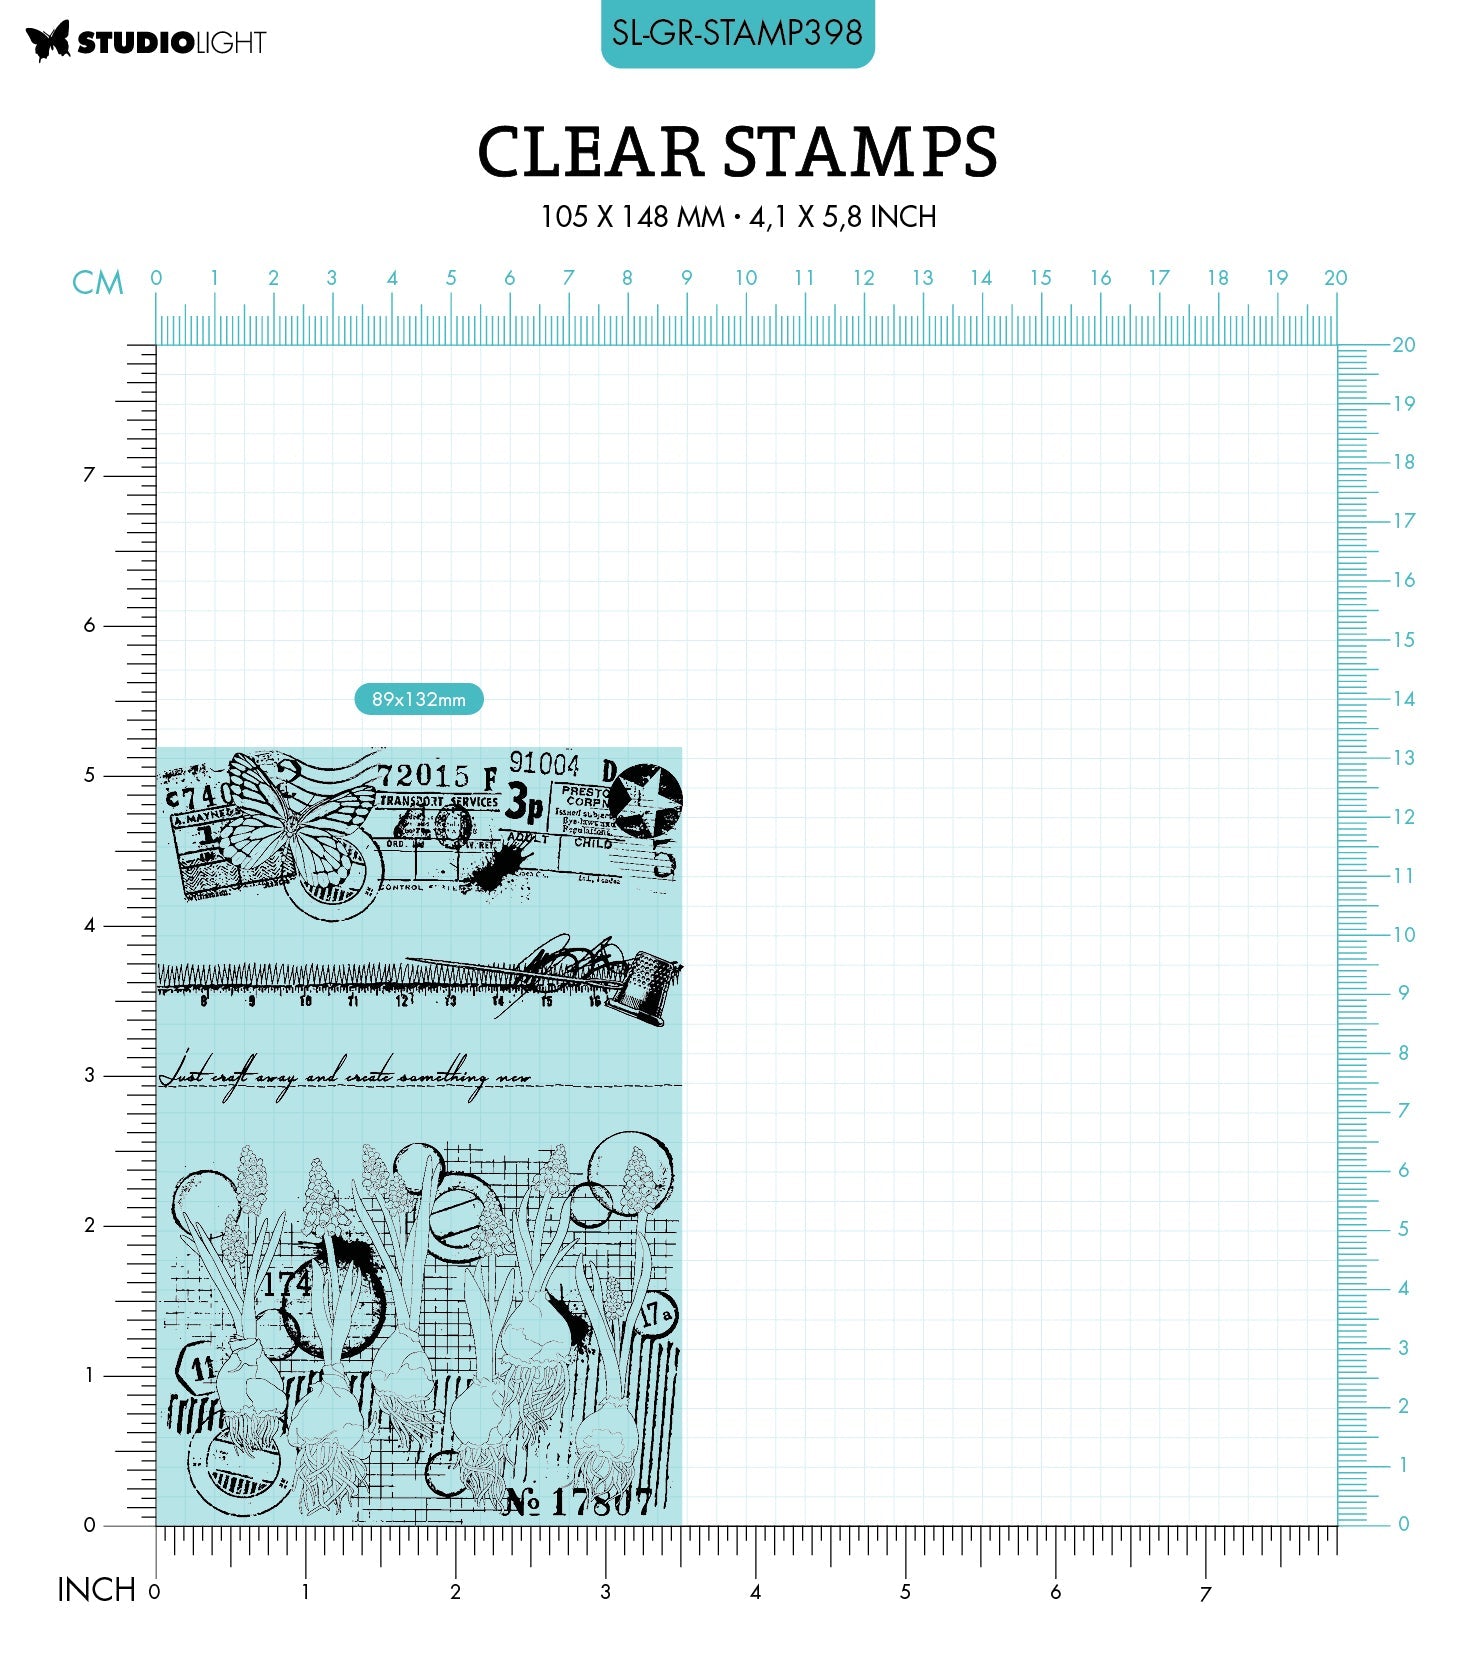 SL Clear Stamp Spring Crafts Grunge Collection 89x132x3mm 4 PC nr.398